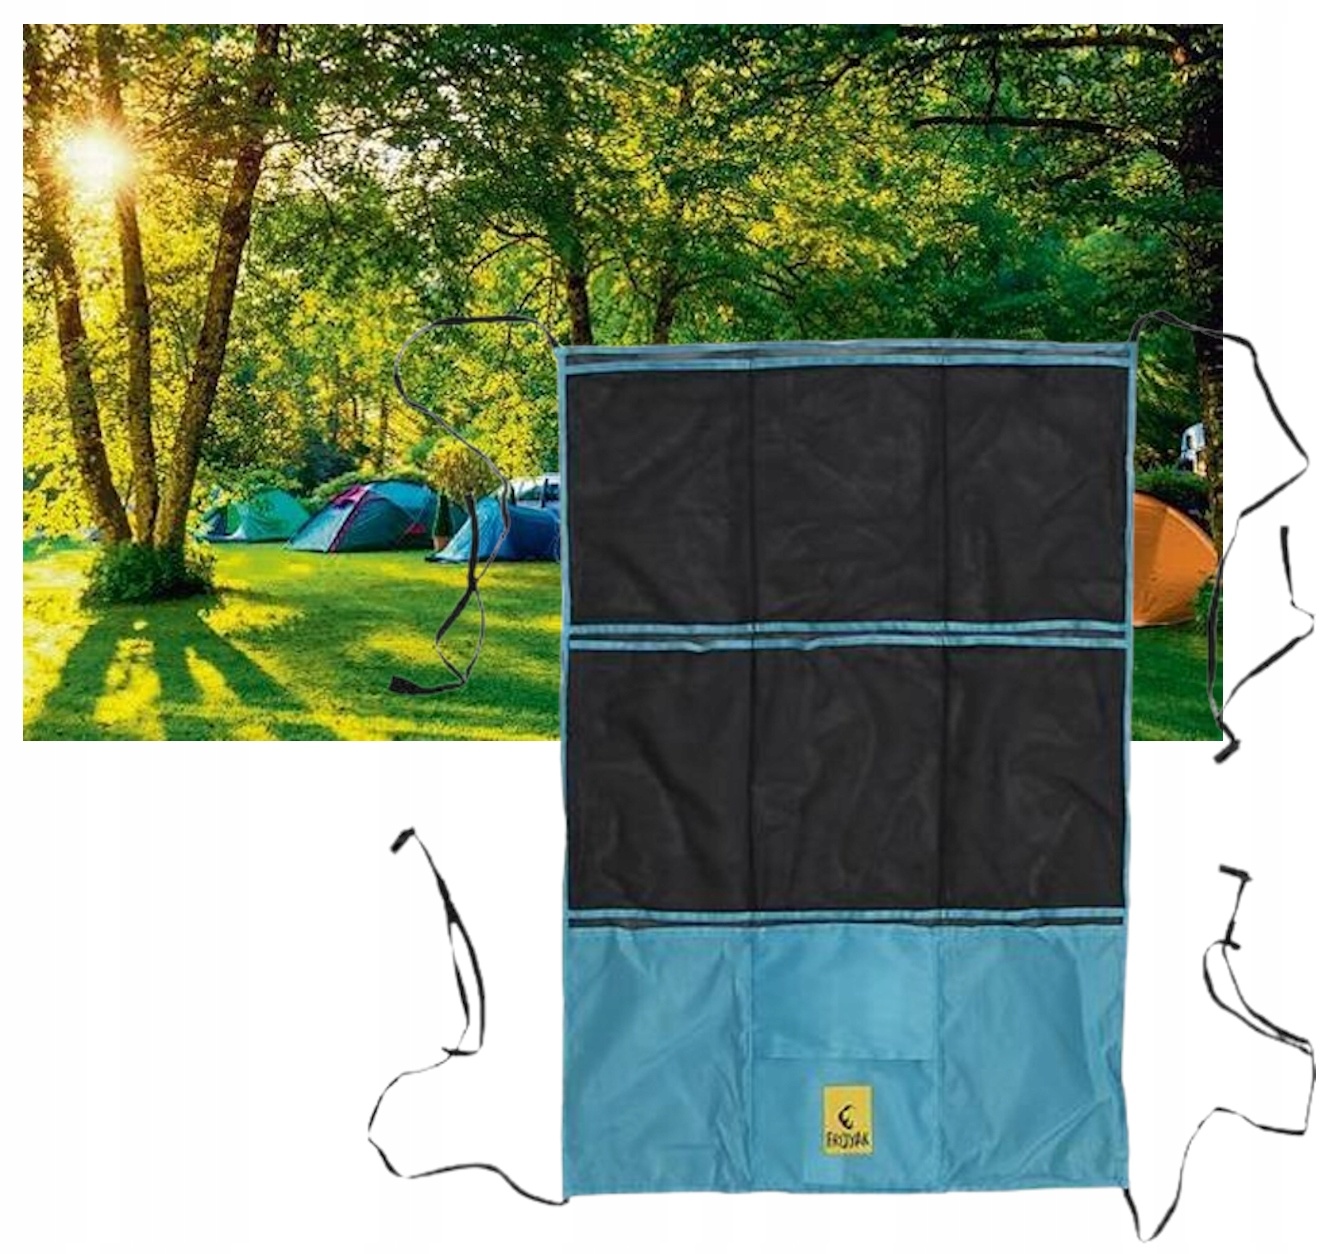 FROYAK Camping Organizer - 9-Sections - pliable - 60 x 90 cm